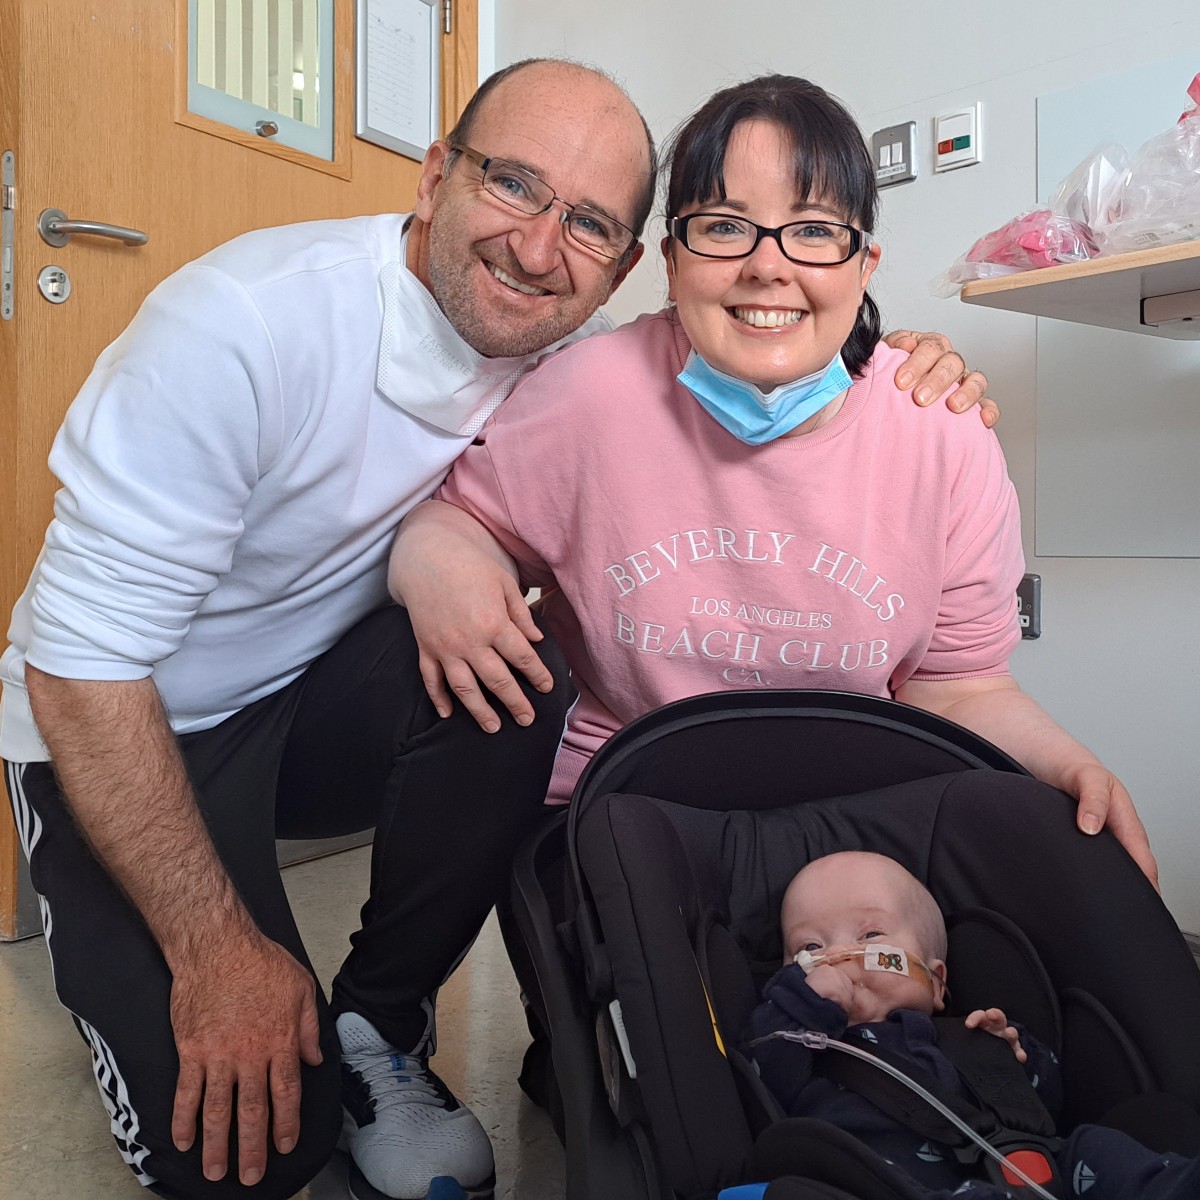 When Michelle and Joe brought Jack home after a year in hospital, they were scared. Caring for a child with a life-limiting condition is a 24-hour job. Thanks to you, LauraLynn could care for Jack in the comfort of his home in Kerry. brnw.ch/21wIW9M